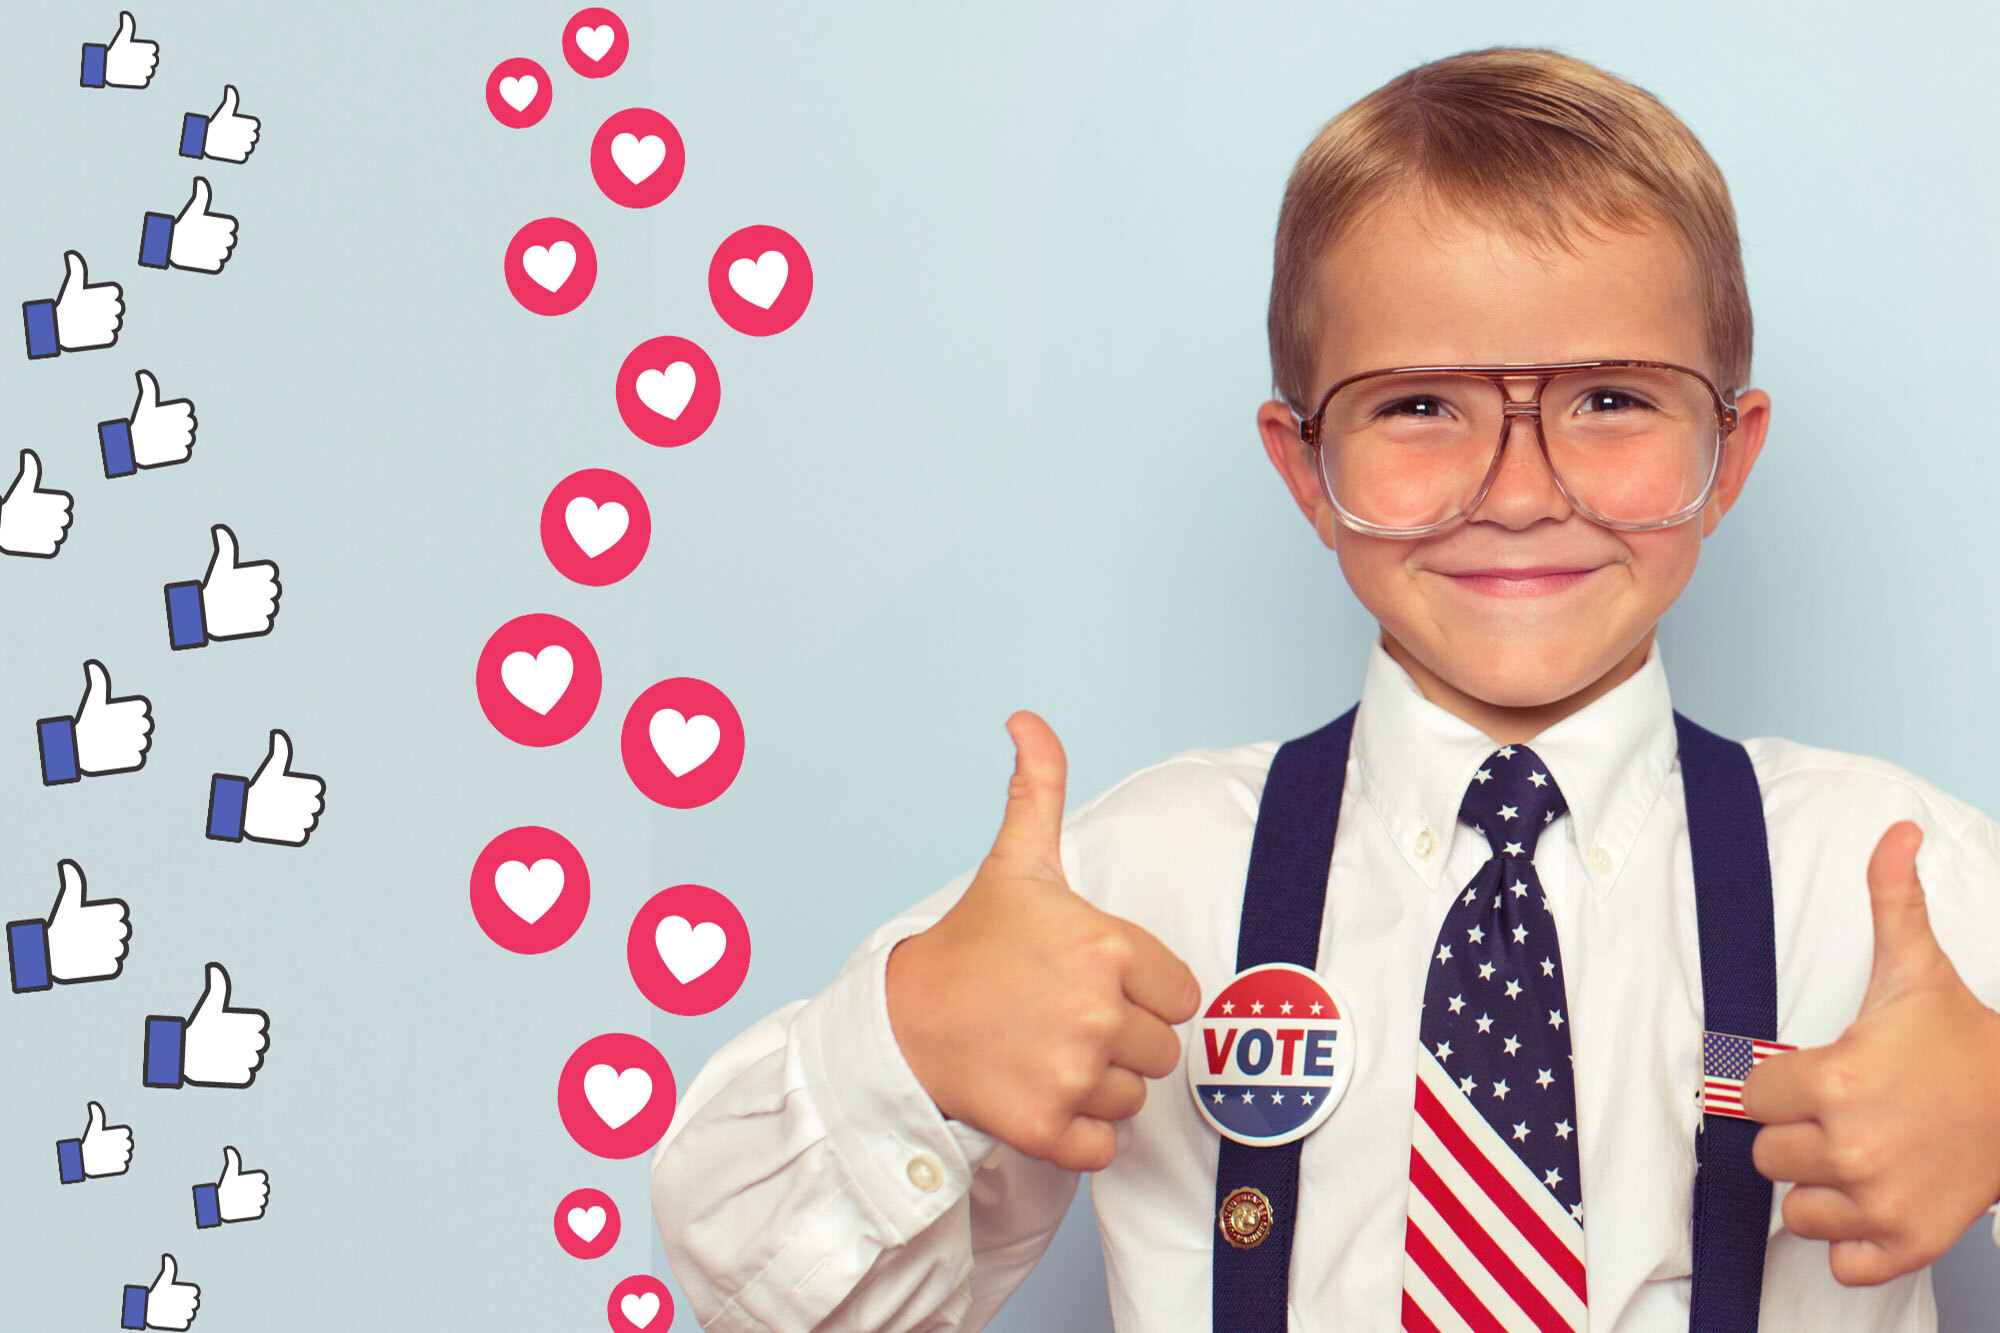 Young boy wearing glasses, white button down shirt, and an American flag tie. He has on suspenders and a vote pin. Social media likes and hearts are going up the page. Young politician.